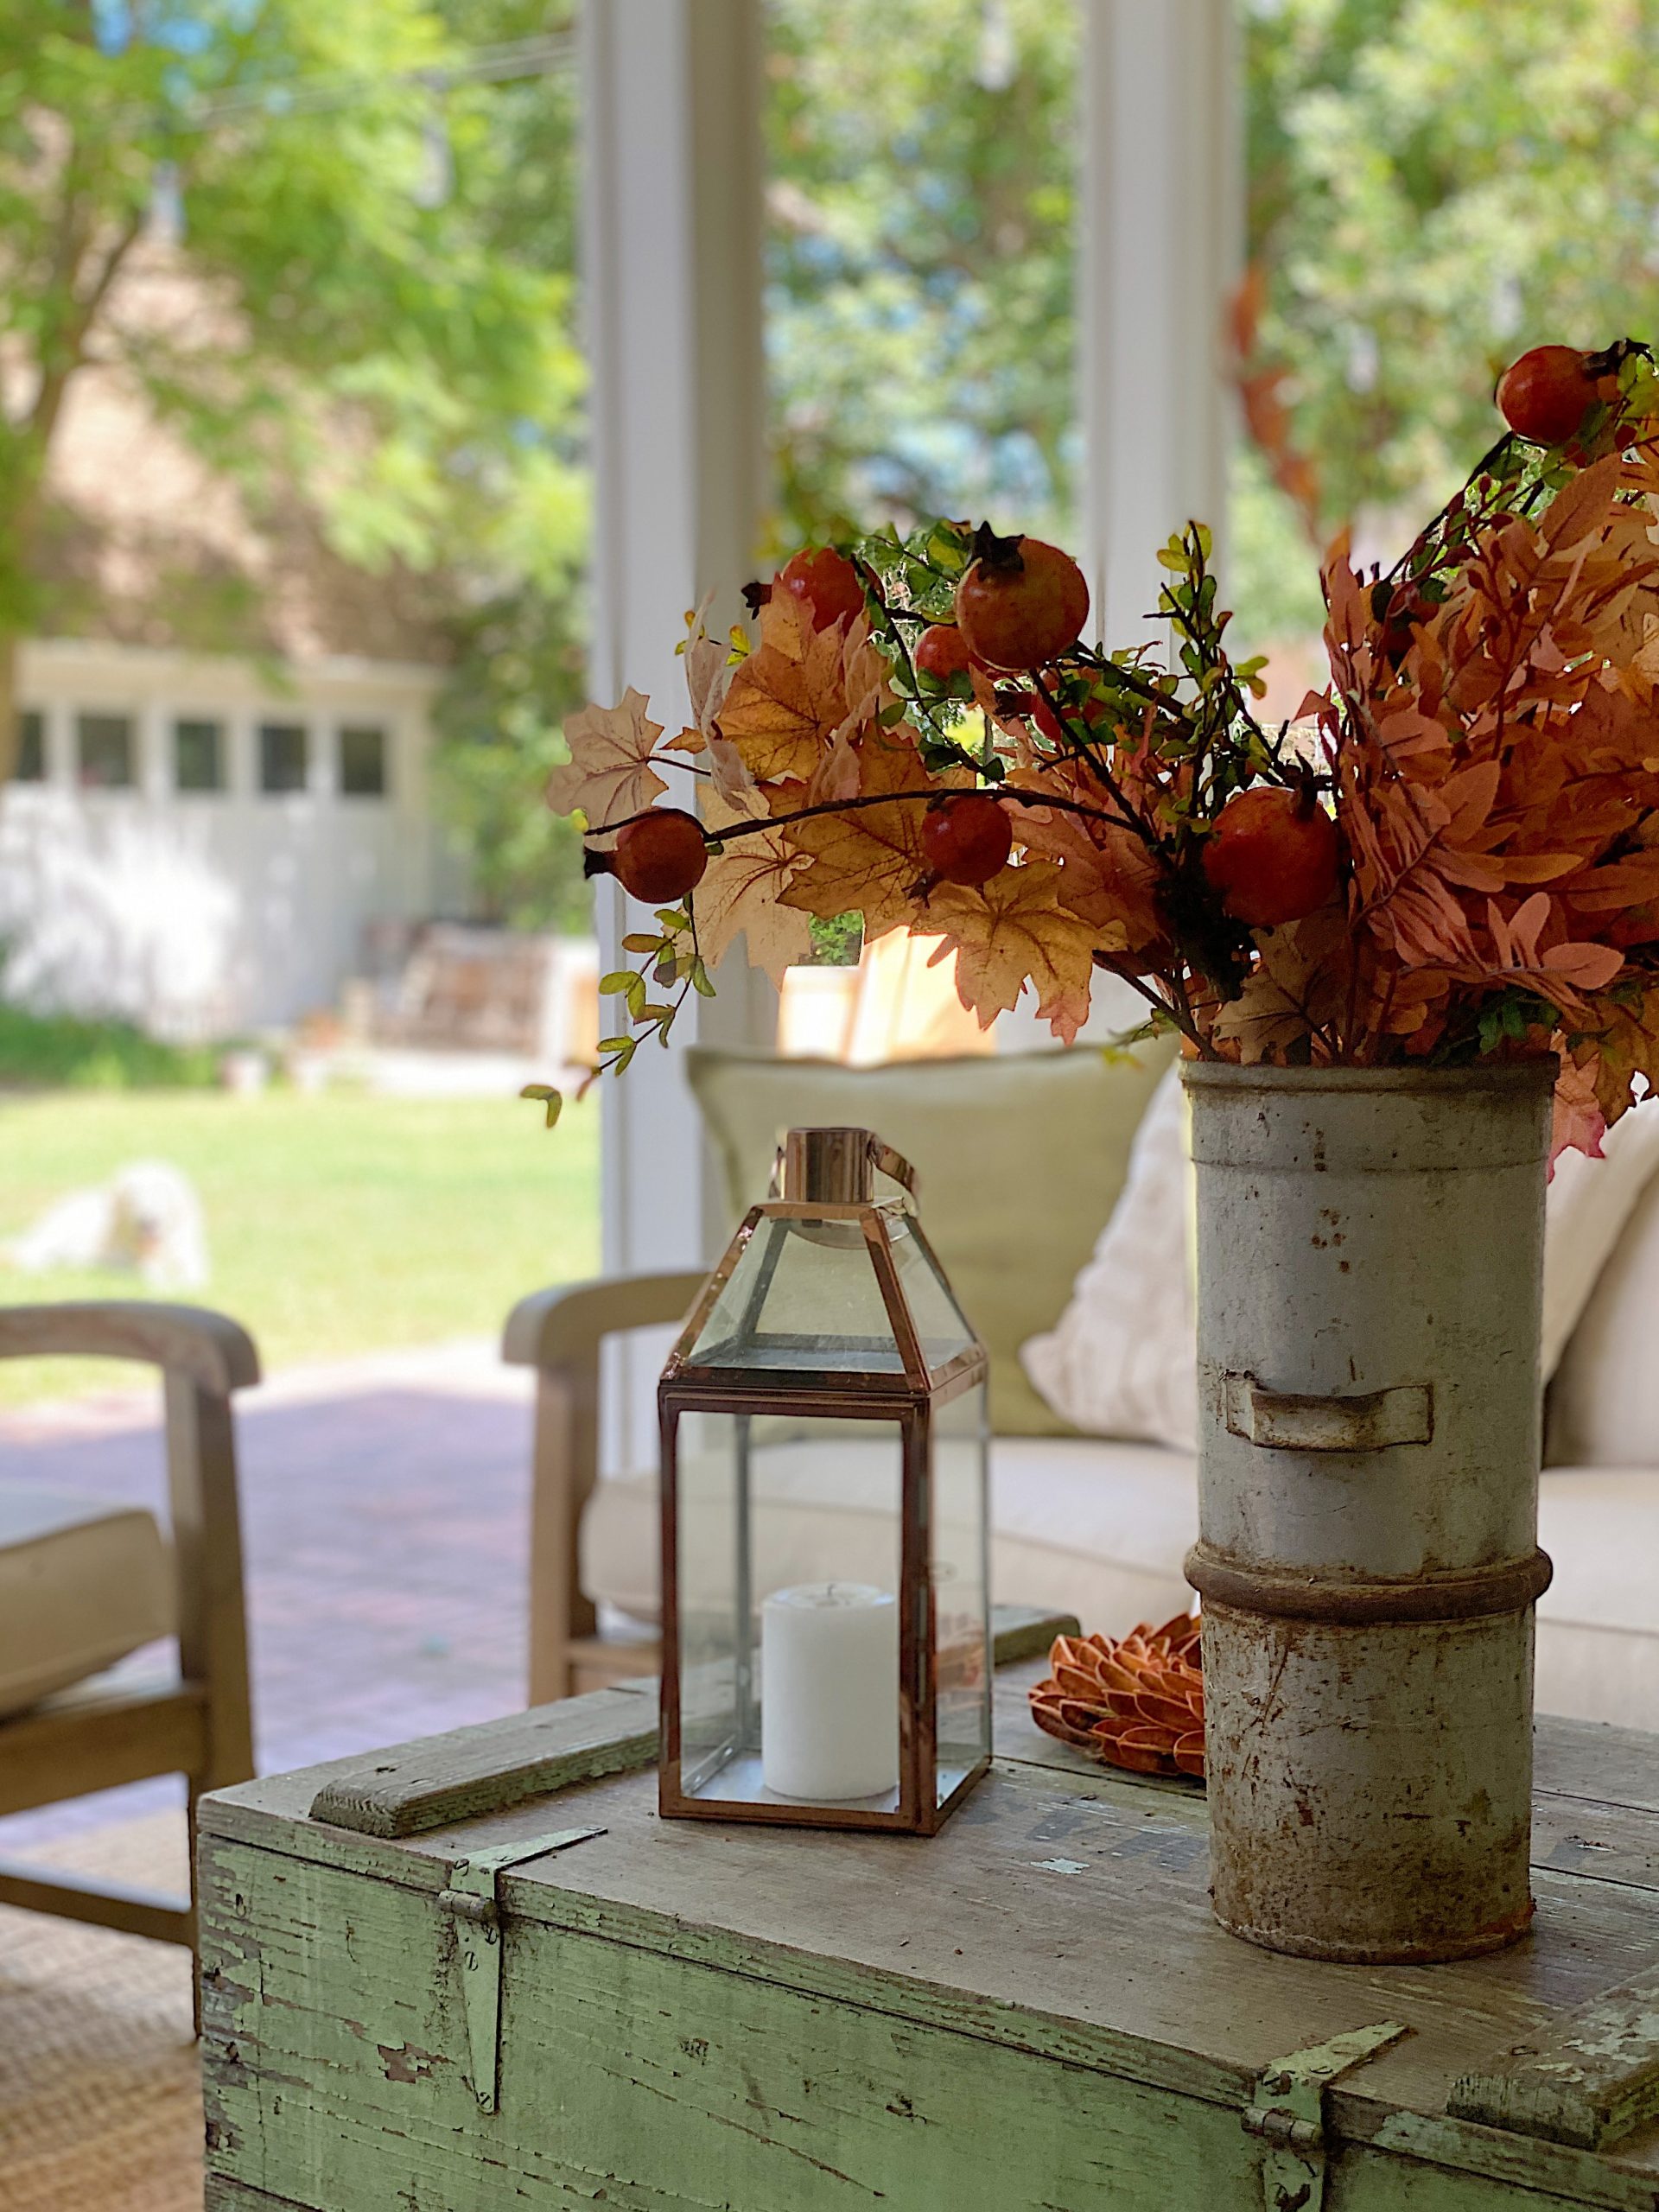 How to Decorate Your Home with Outdoor Fall Decor 3